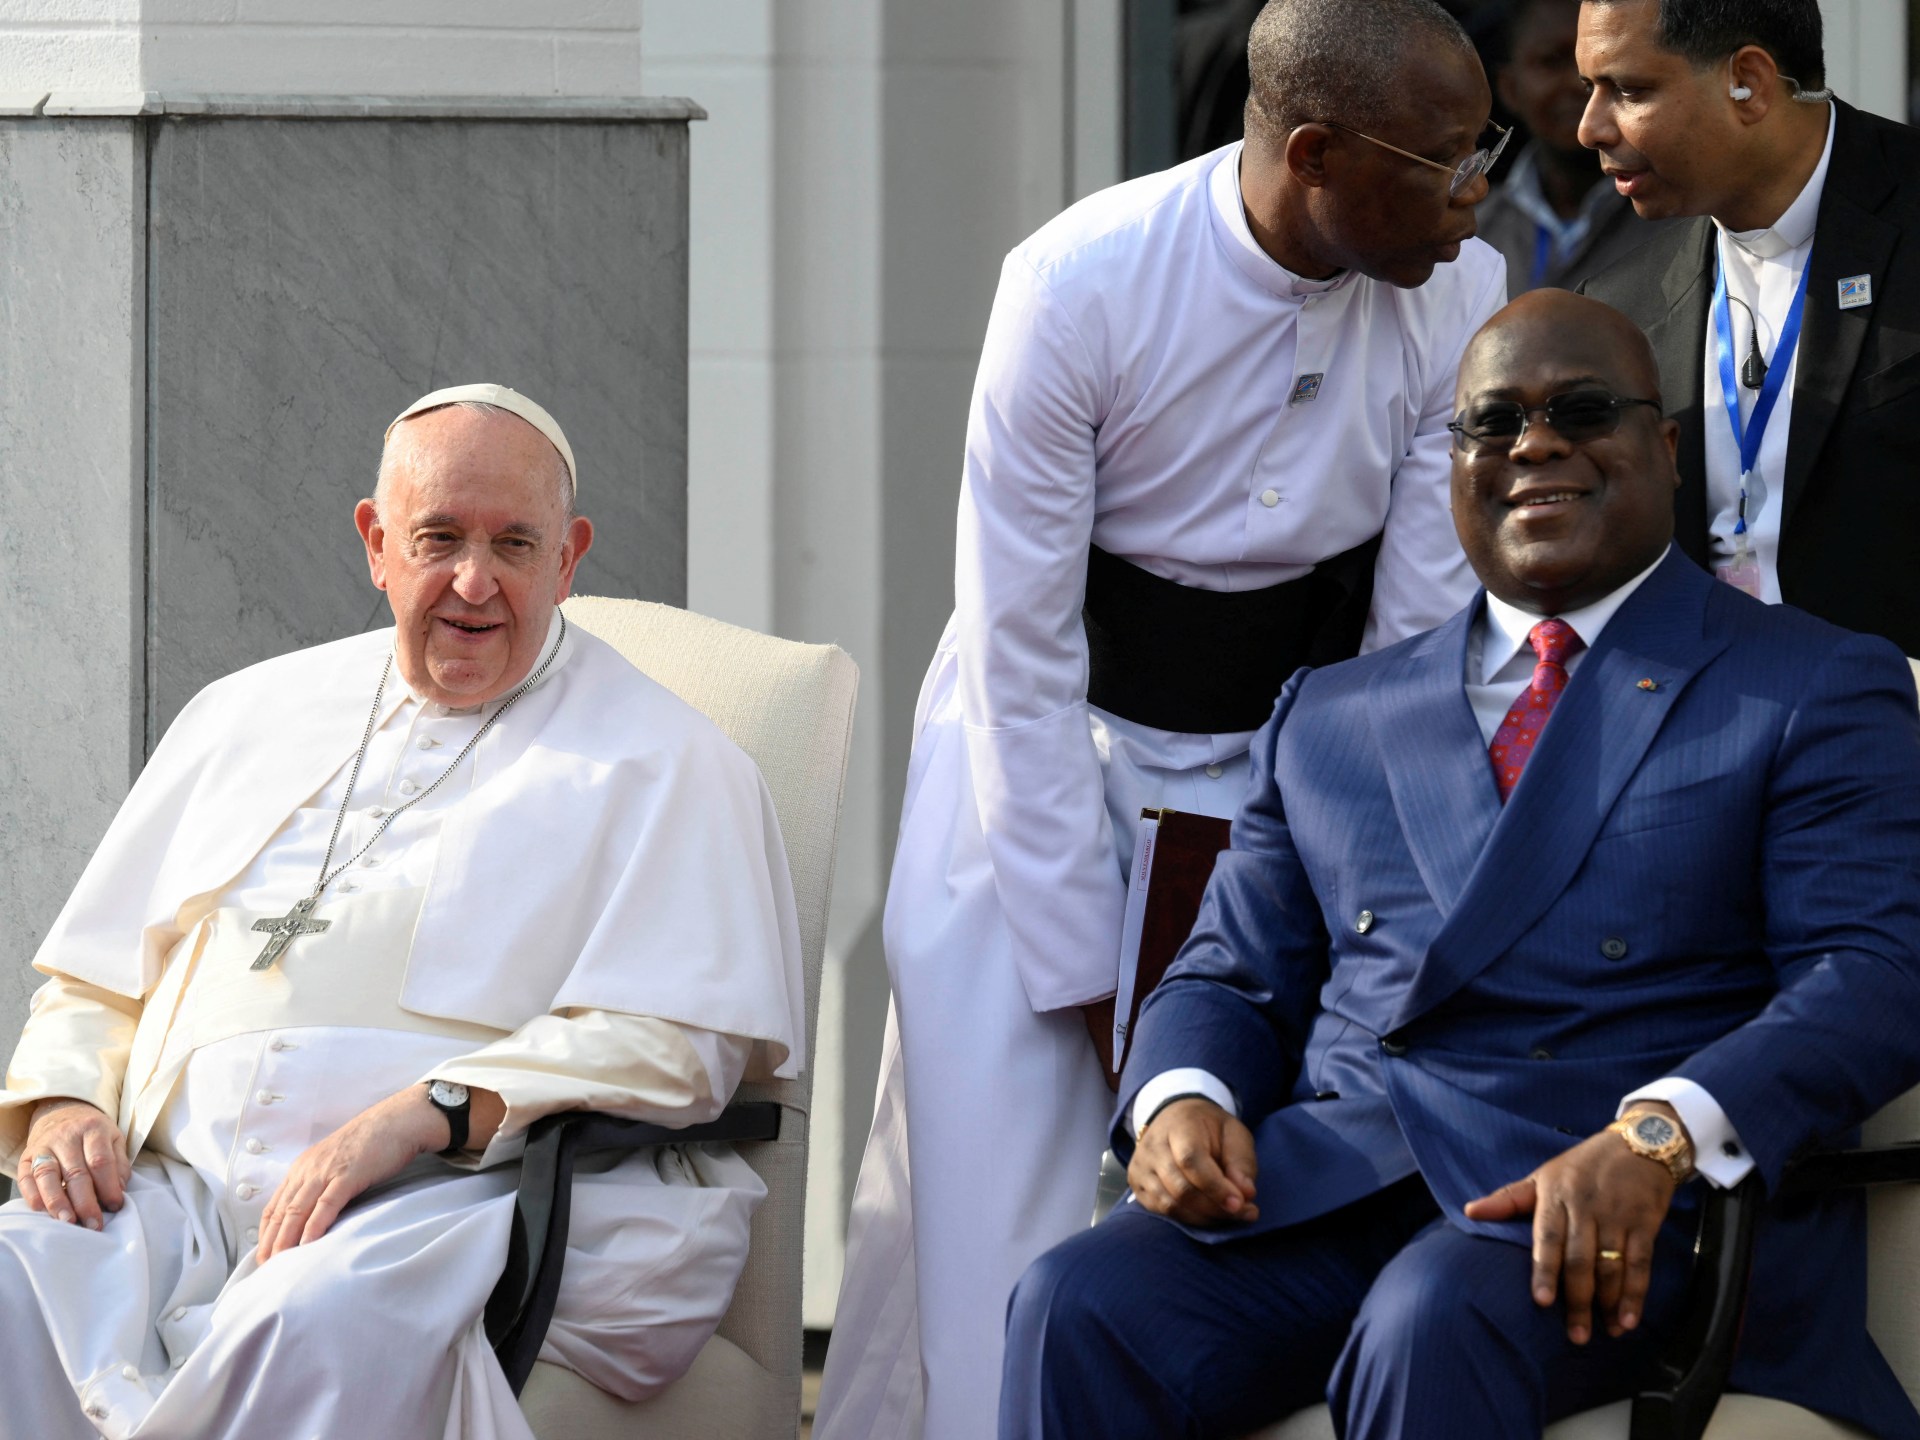 Pope slams foreign plundering of Africa as he arrives in DR Congo | News